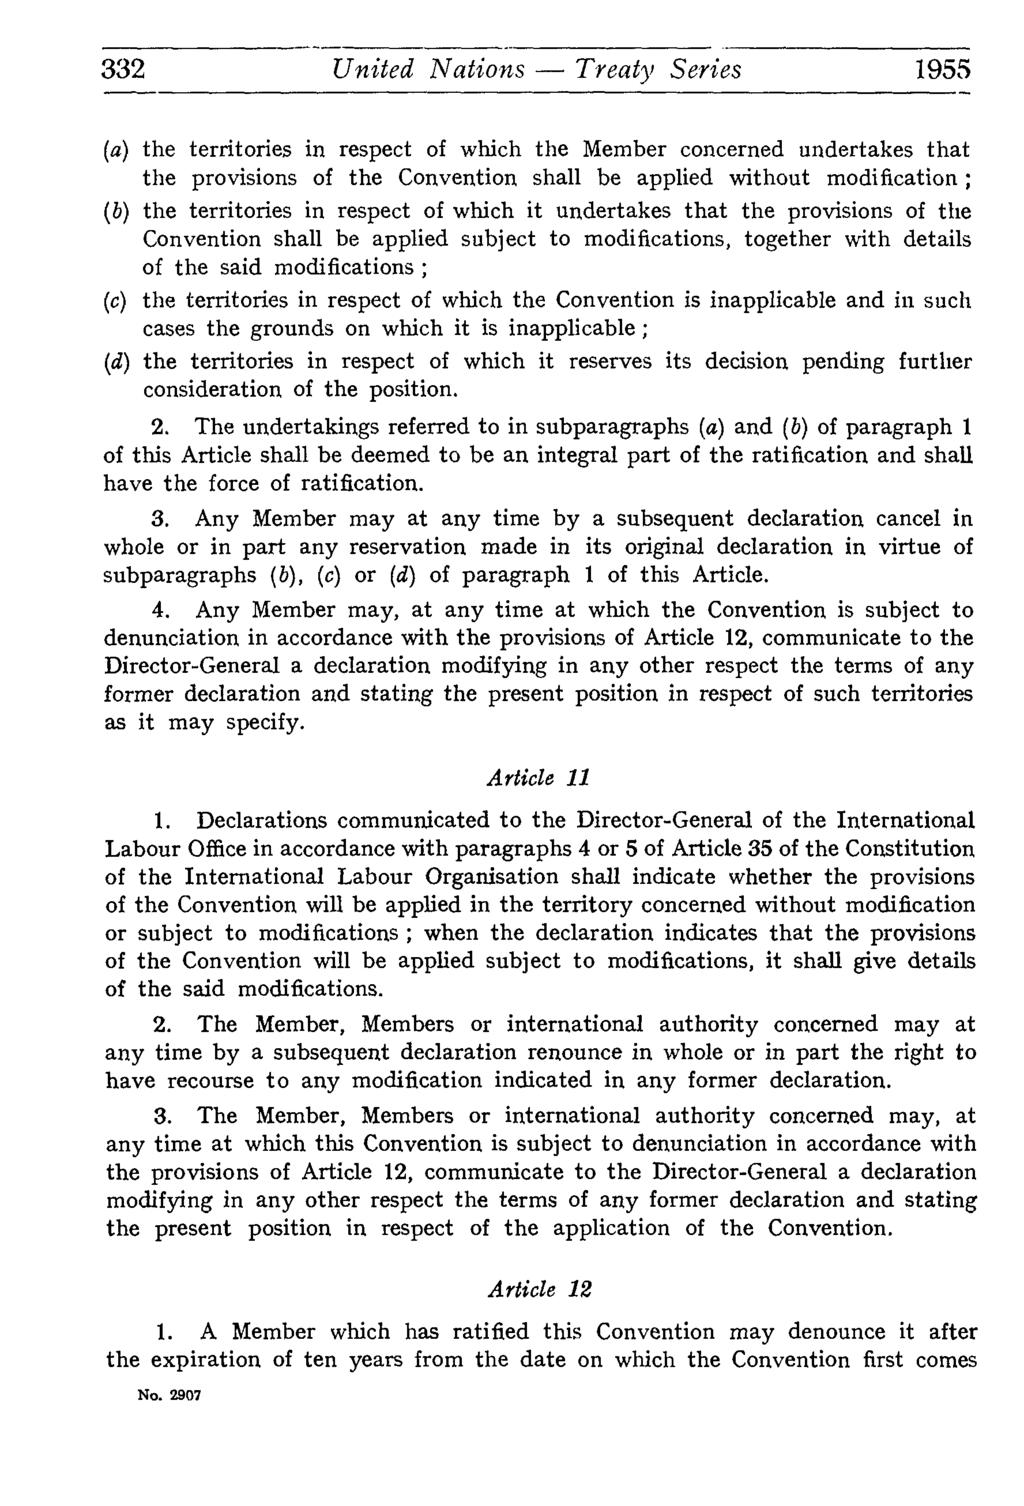 332 United Nations Treaty Series 1955 (a) the territories in respect of which the Member concerned undertakes that the provisions of the Convention shall be applied without modification ; (b) the